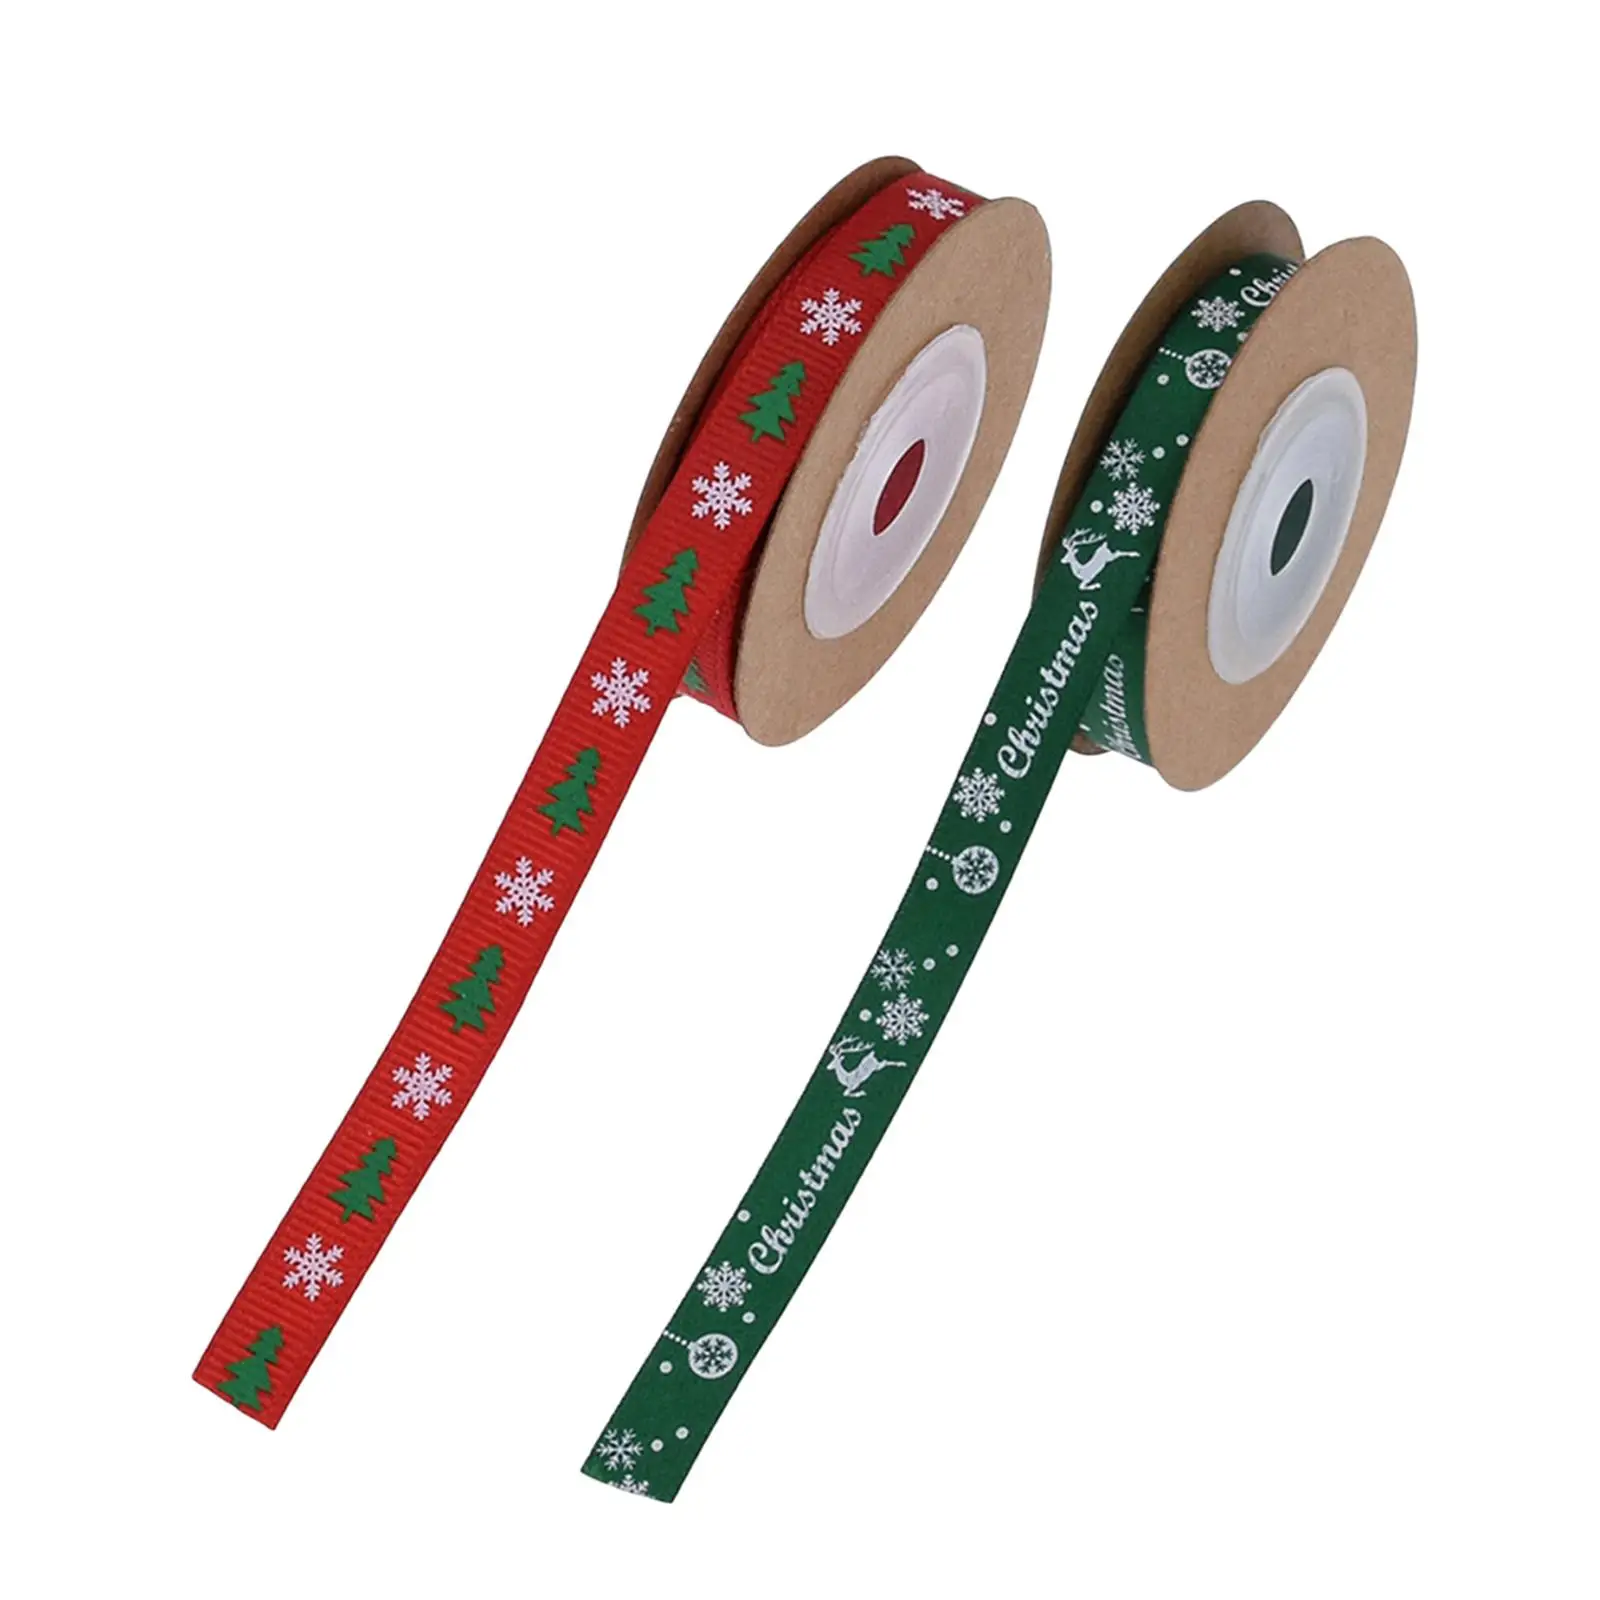 Polyester Holiday Christmas Ribbon Printed for Craft Sewing Xmas Decor Party Gift Wrapping